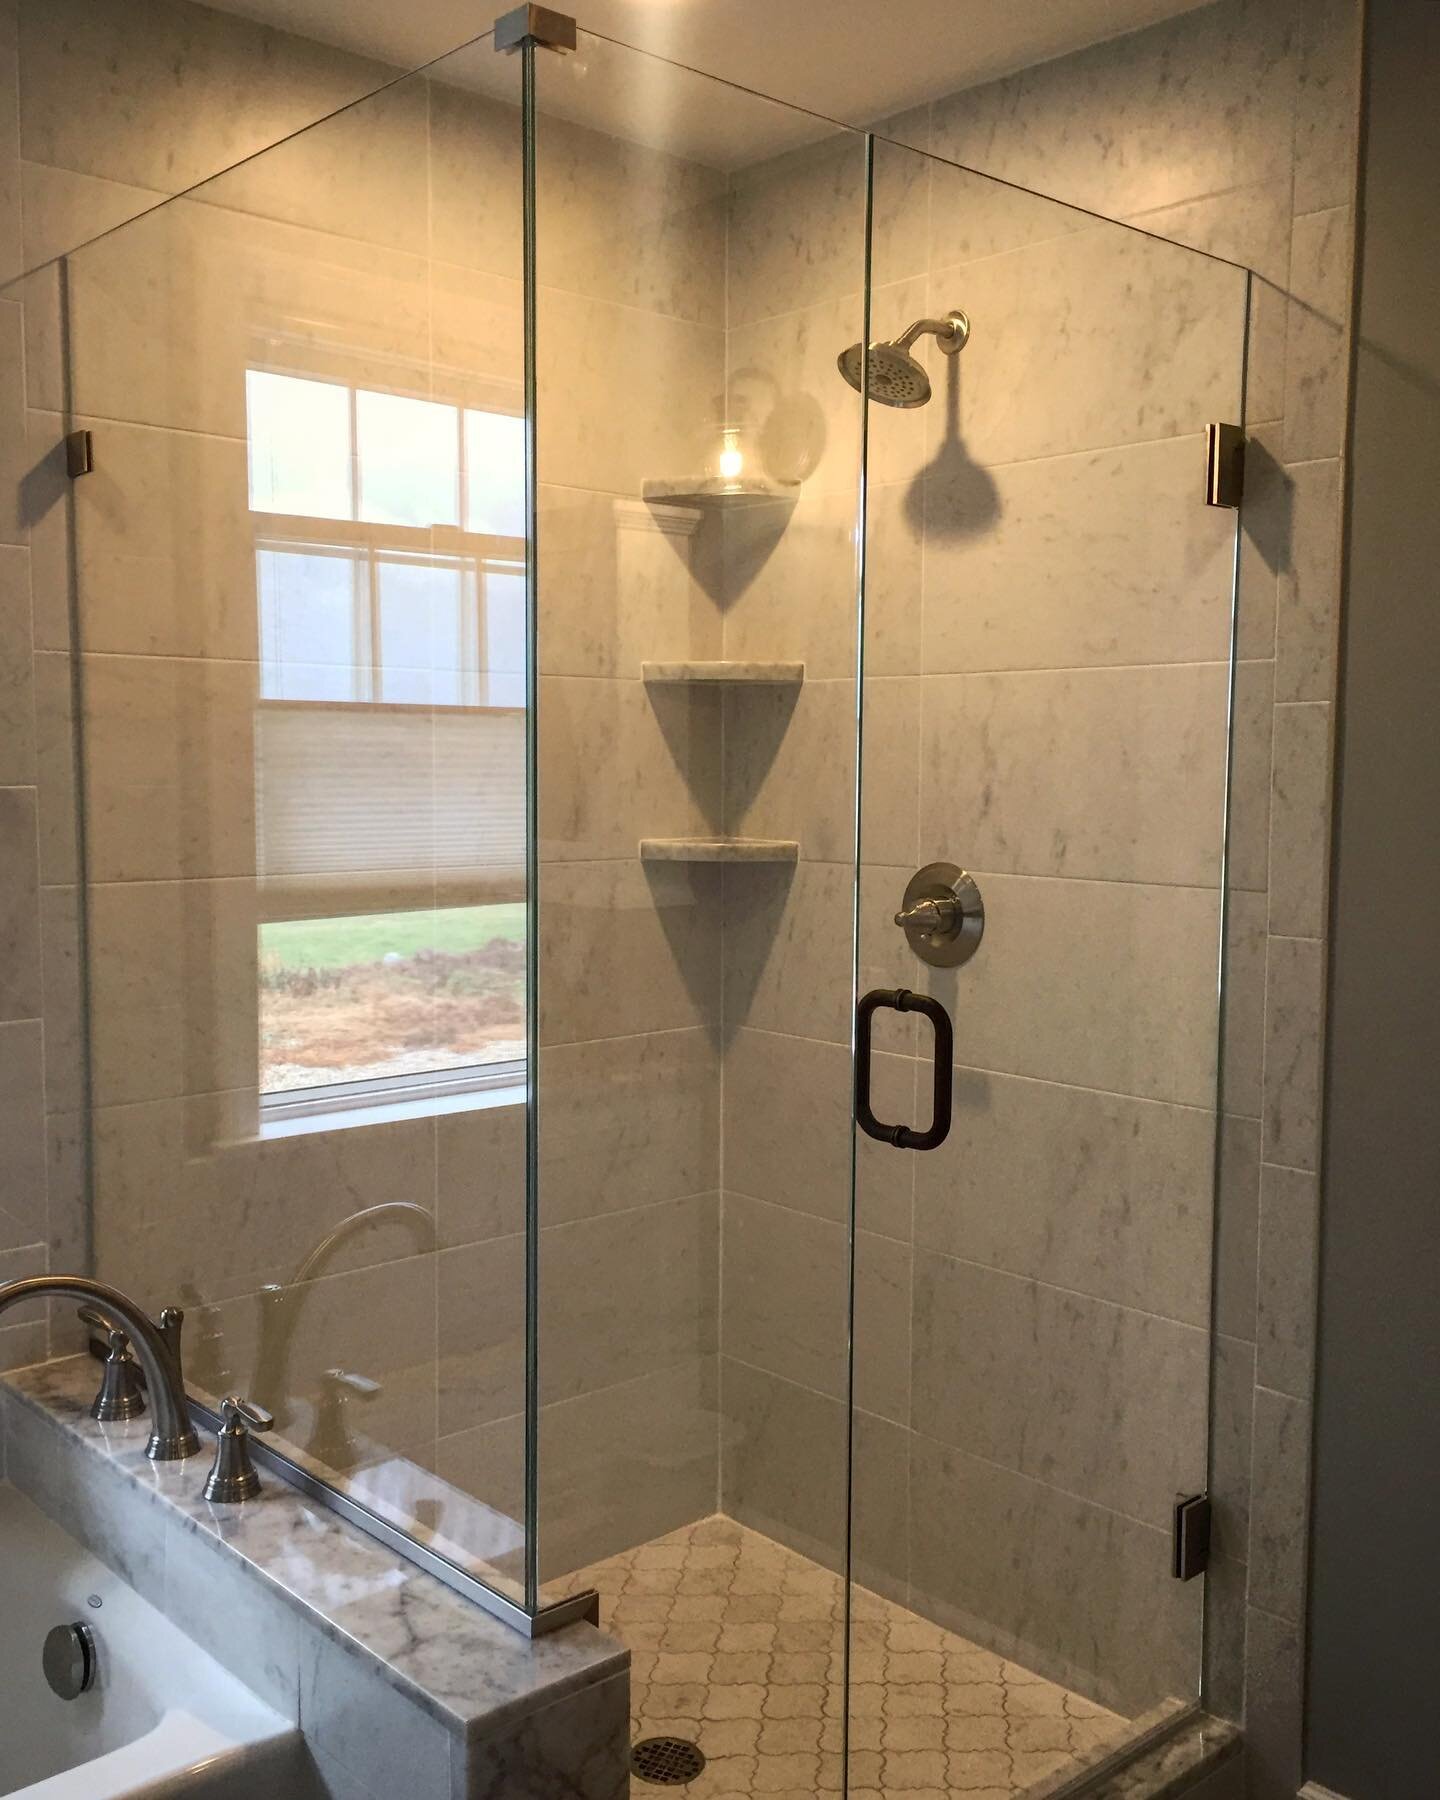 STUNNING SHOWER
-
Glass was installed today at the bathroom remodel project. Long lead times on the glass were unfortunate, but the customer was so pleased with the finished product she sent over this picture! Hope everyone has gotten this week going